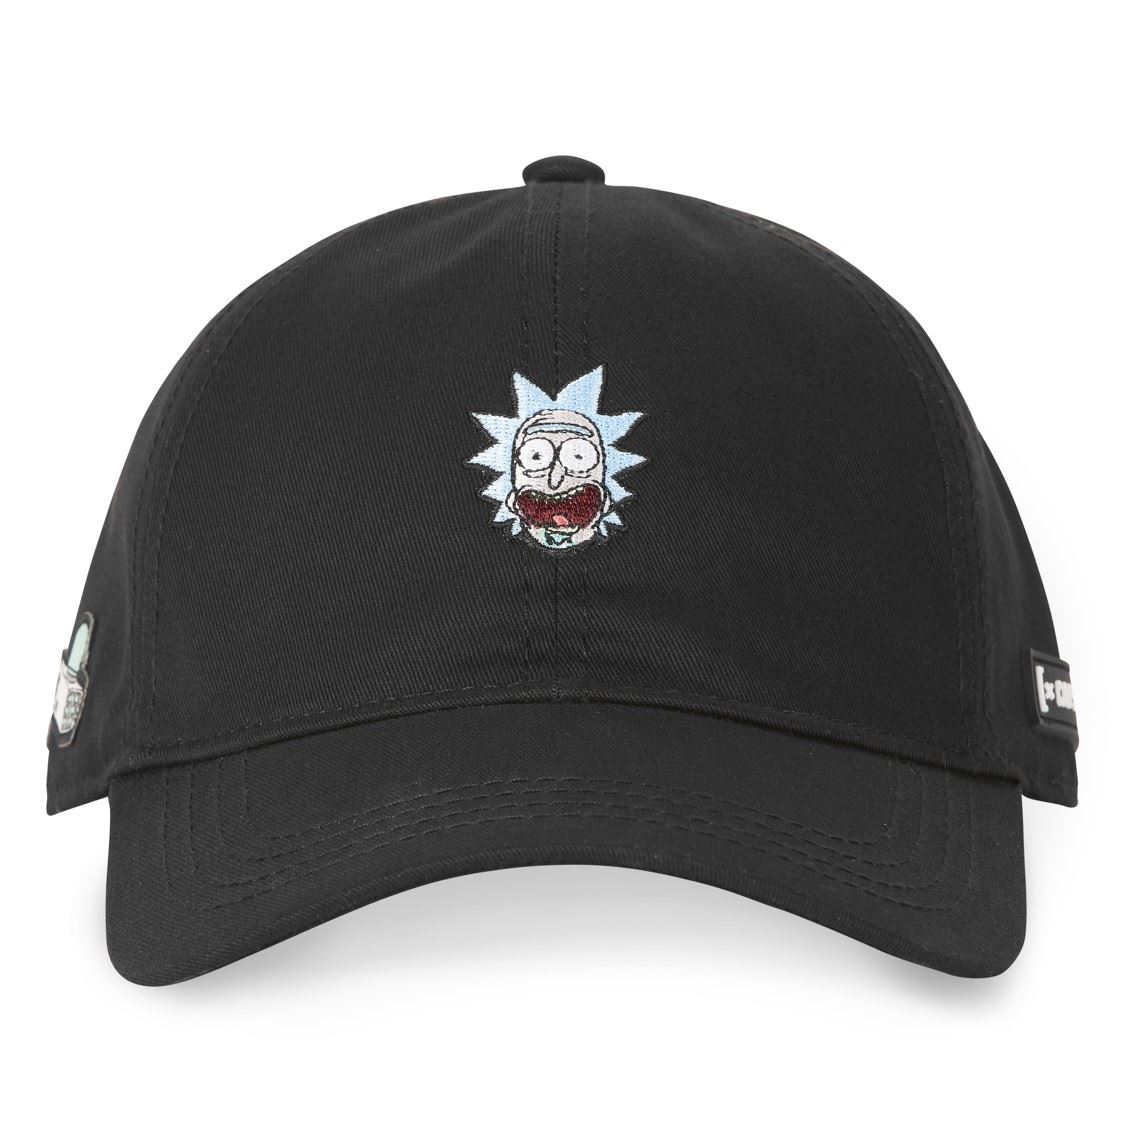 Rick and Morty Rick Black Unstructured Strapback Cap Capslab